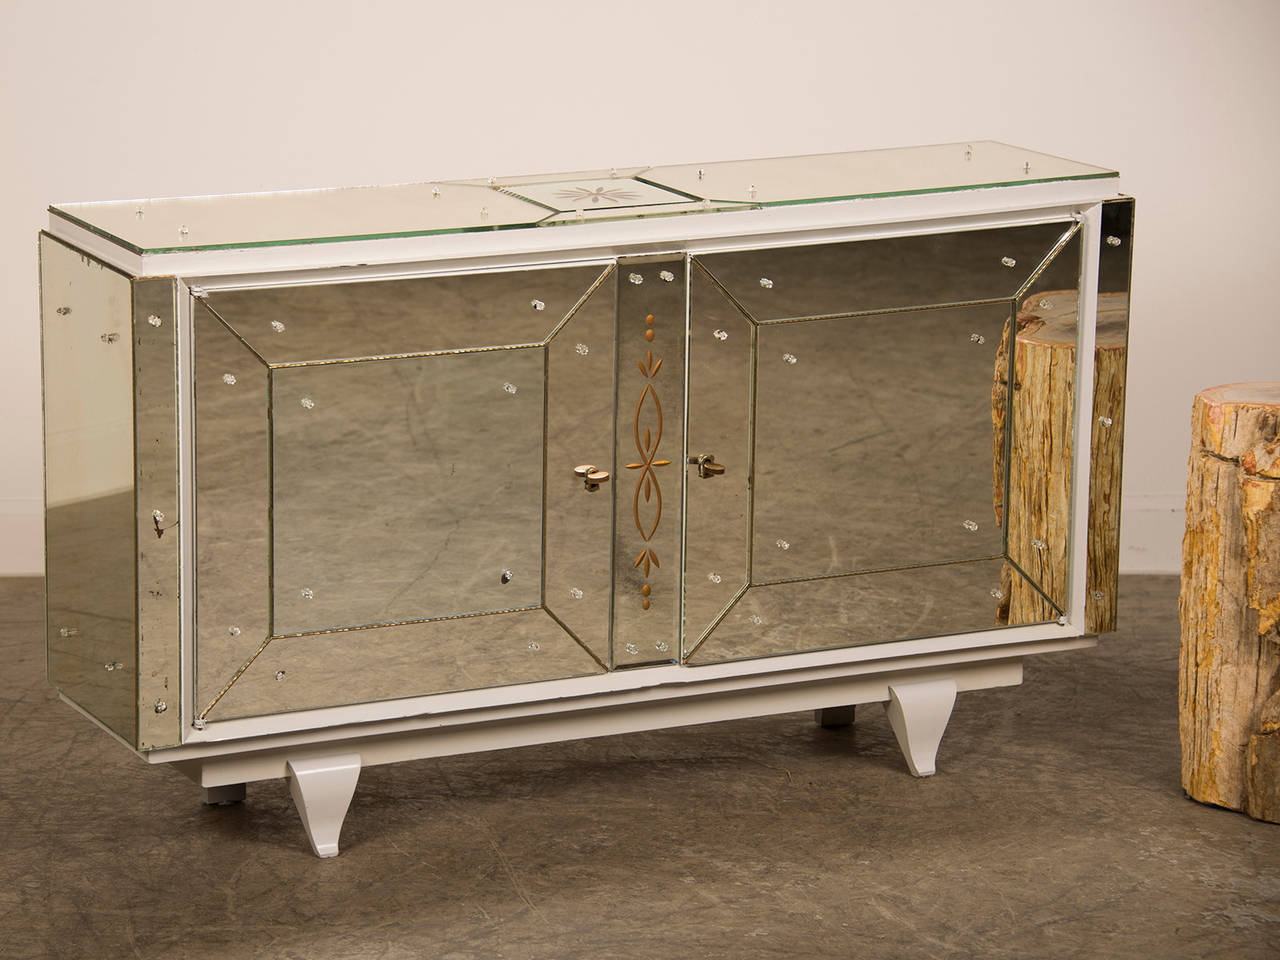 Receive our new selections direct from 1stdibs by email each week. Please click Follow Dealer below and see them first!

This exceptional cabinet buffet is notable for the original set of 20 individual mirrored panels that encase the wooden body.